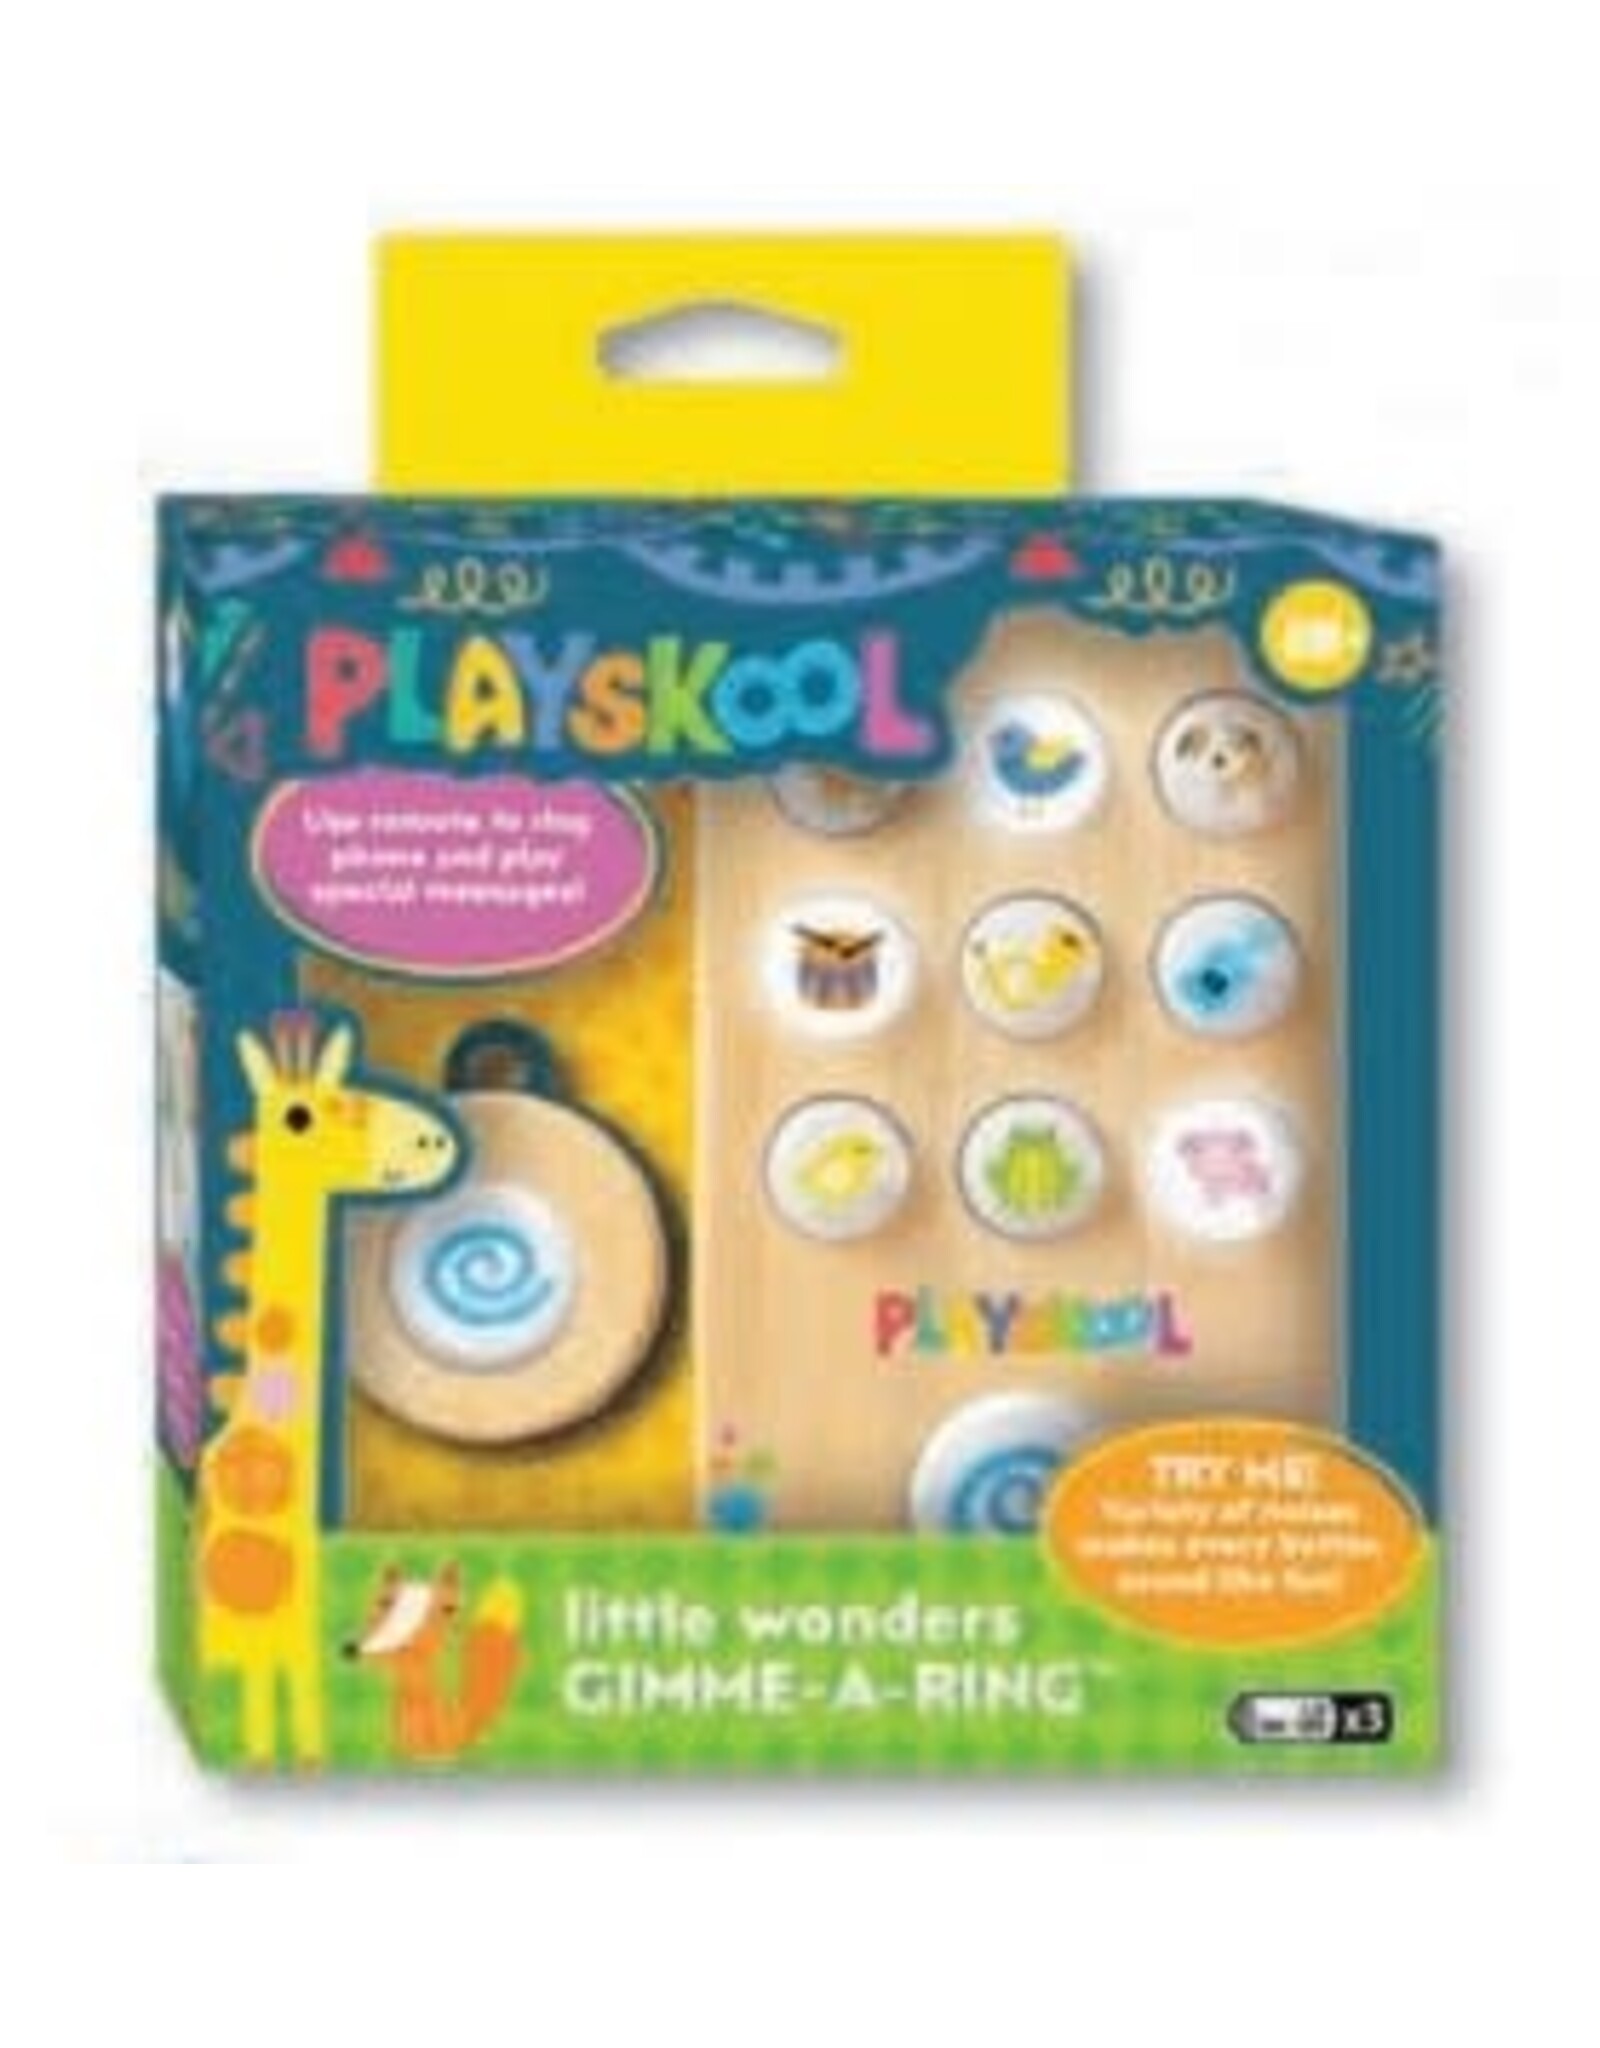 PlaySkool Gimme A Ring